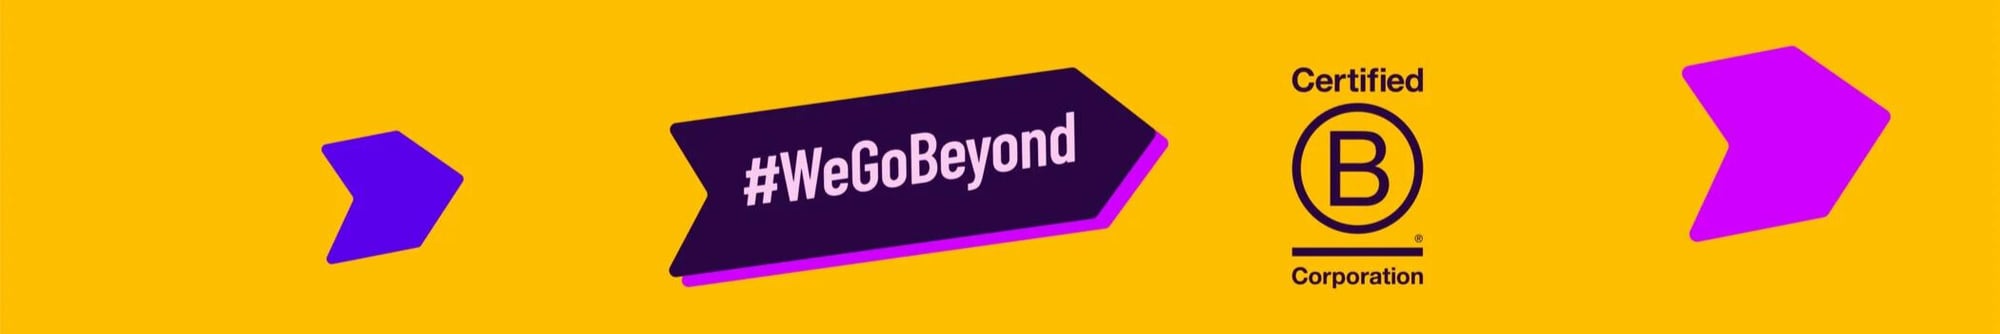 bcorp-banner-gobeyond